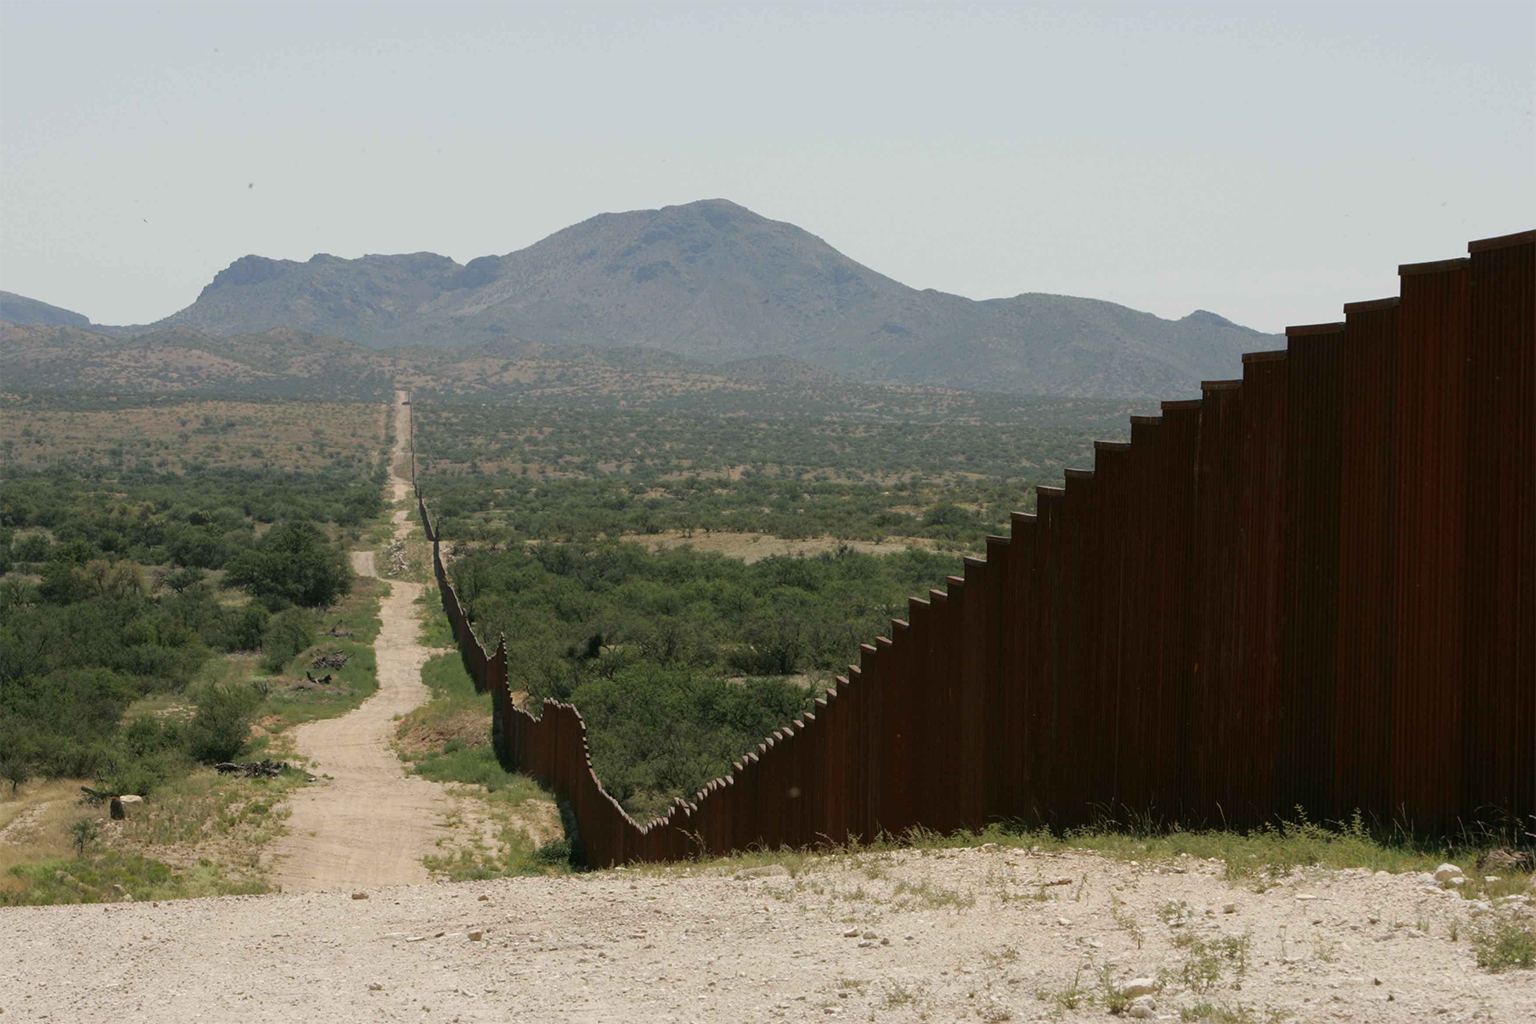 Part of the U.S border wall that bisects the Sonoran and Chihuahuan deserts along the boundary with Mexico.